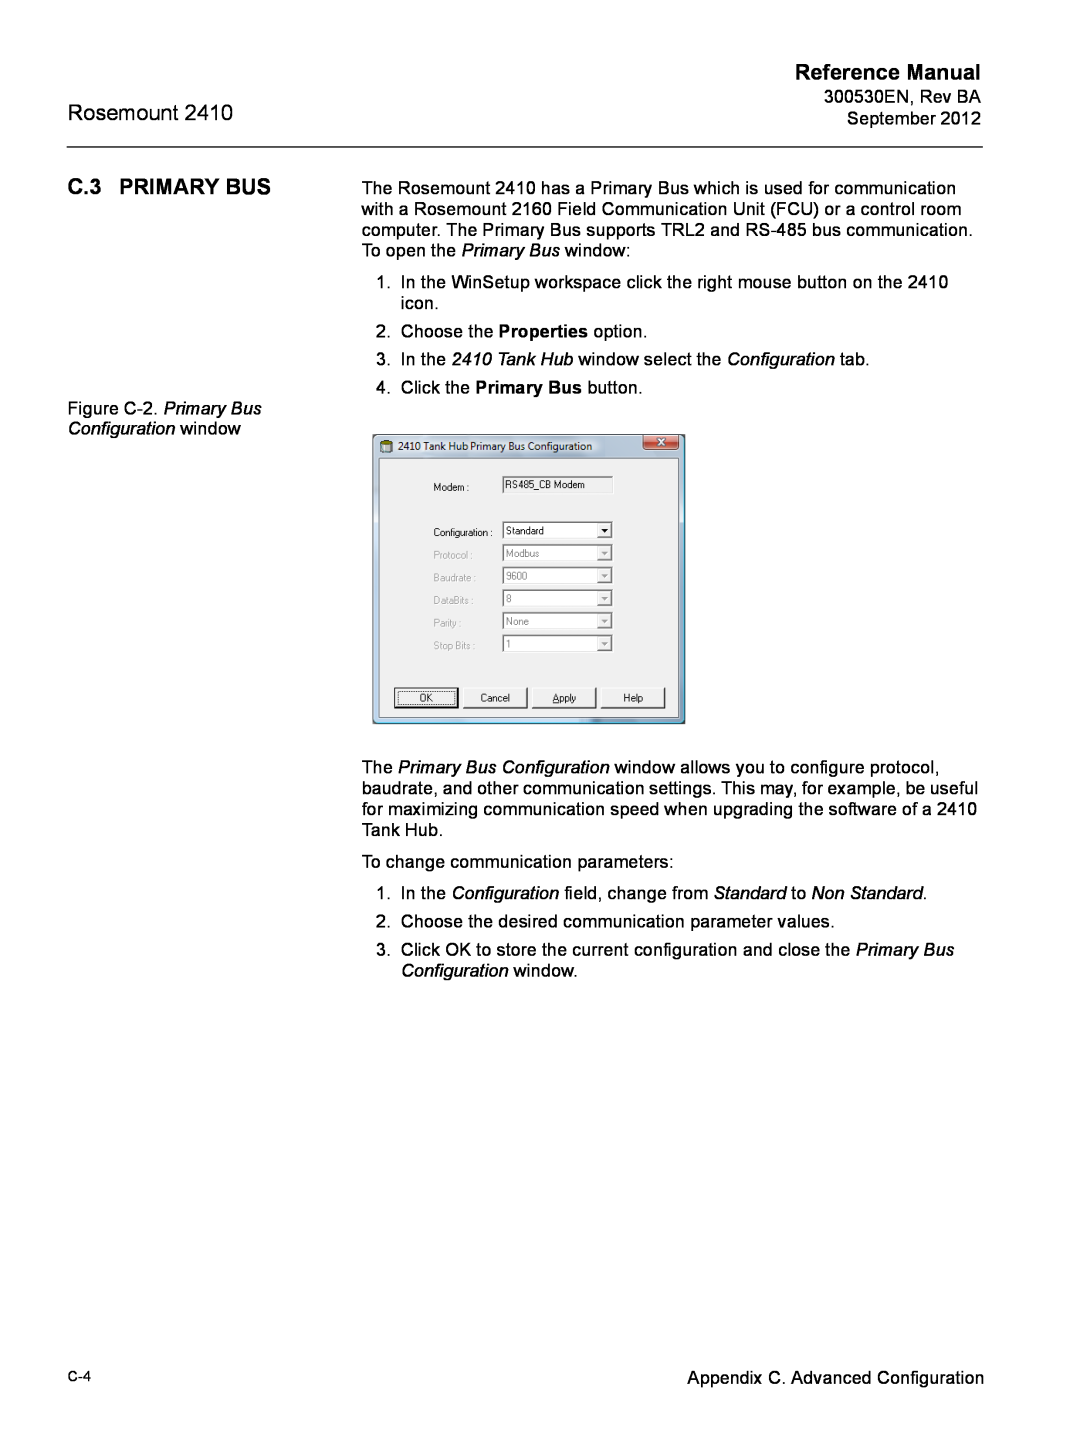 Emerson Process Management Rosemount 2410 manual C.3 PRIMARY BUS, Reference Manual, Configuration window 